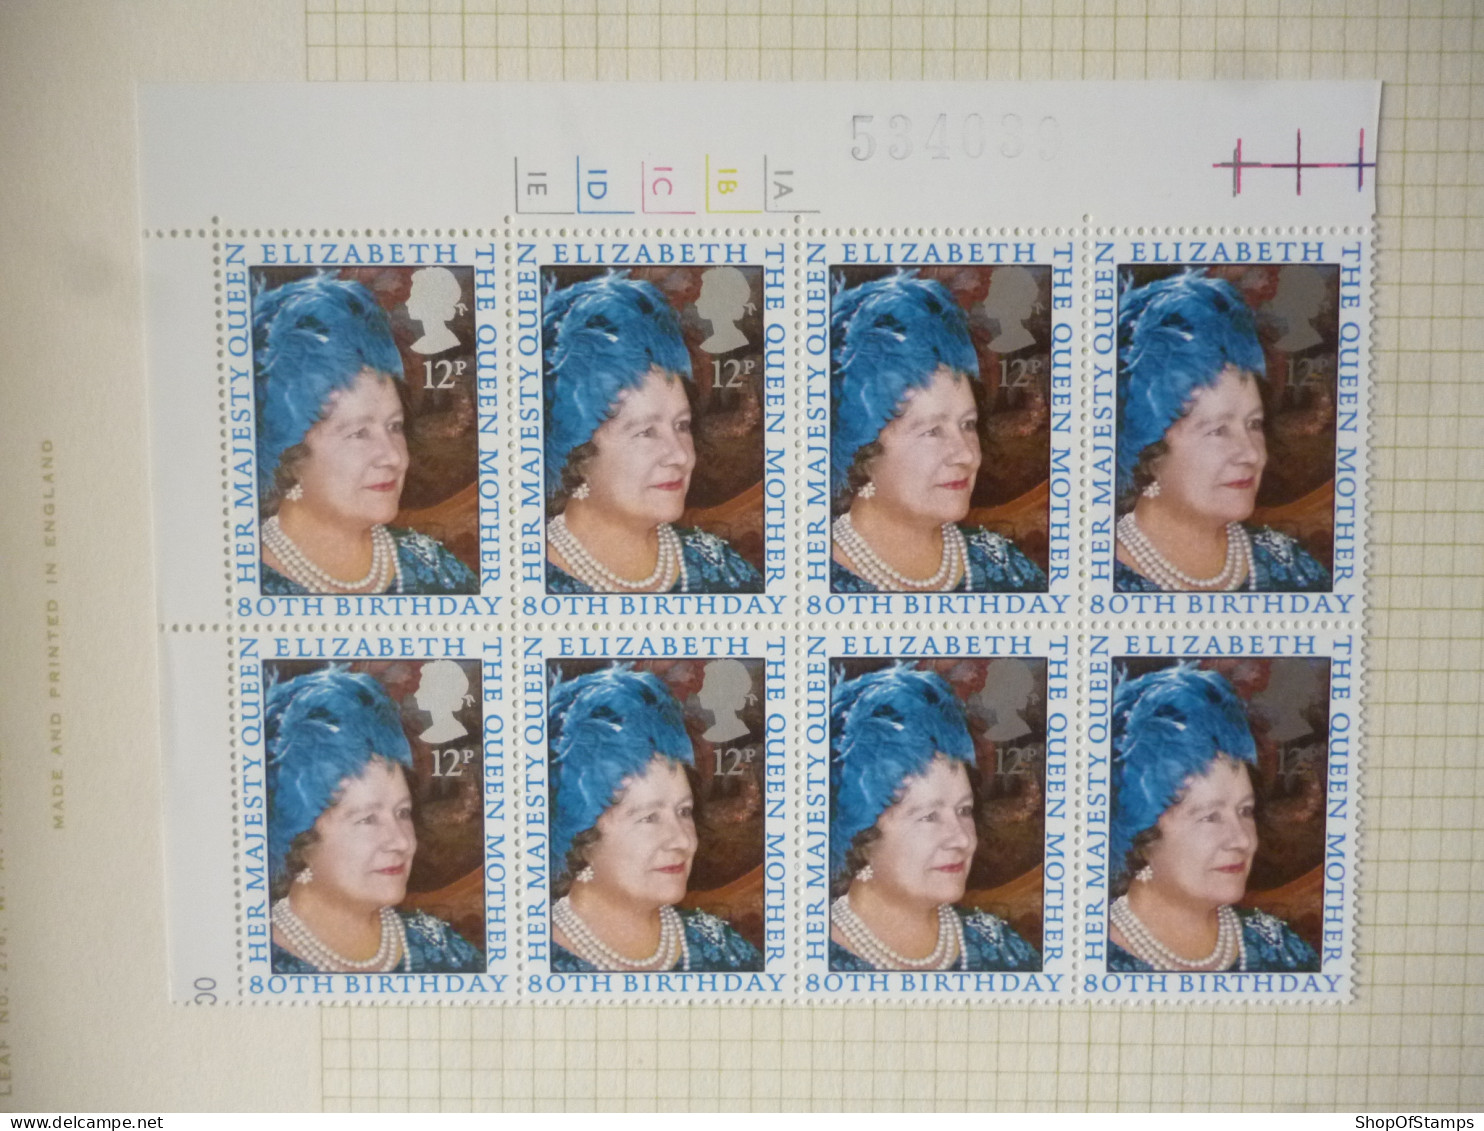 GREAT BRITAIN SG 1129 QUEEN MOTHER 80 BIRTHDAY BL8 MARGIN - Sheets, Plate Blocks & Multiples